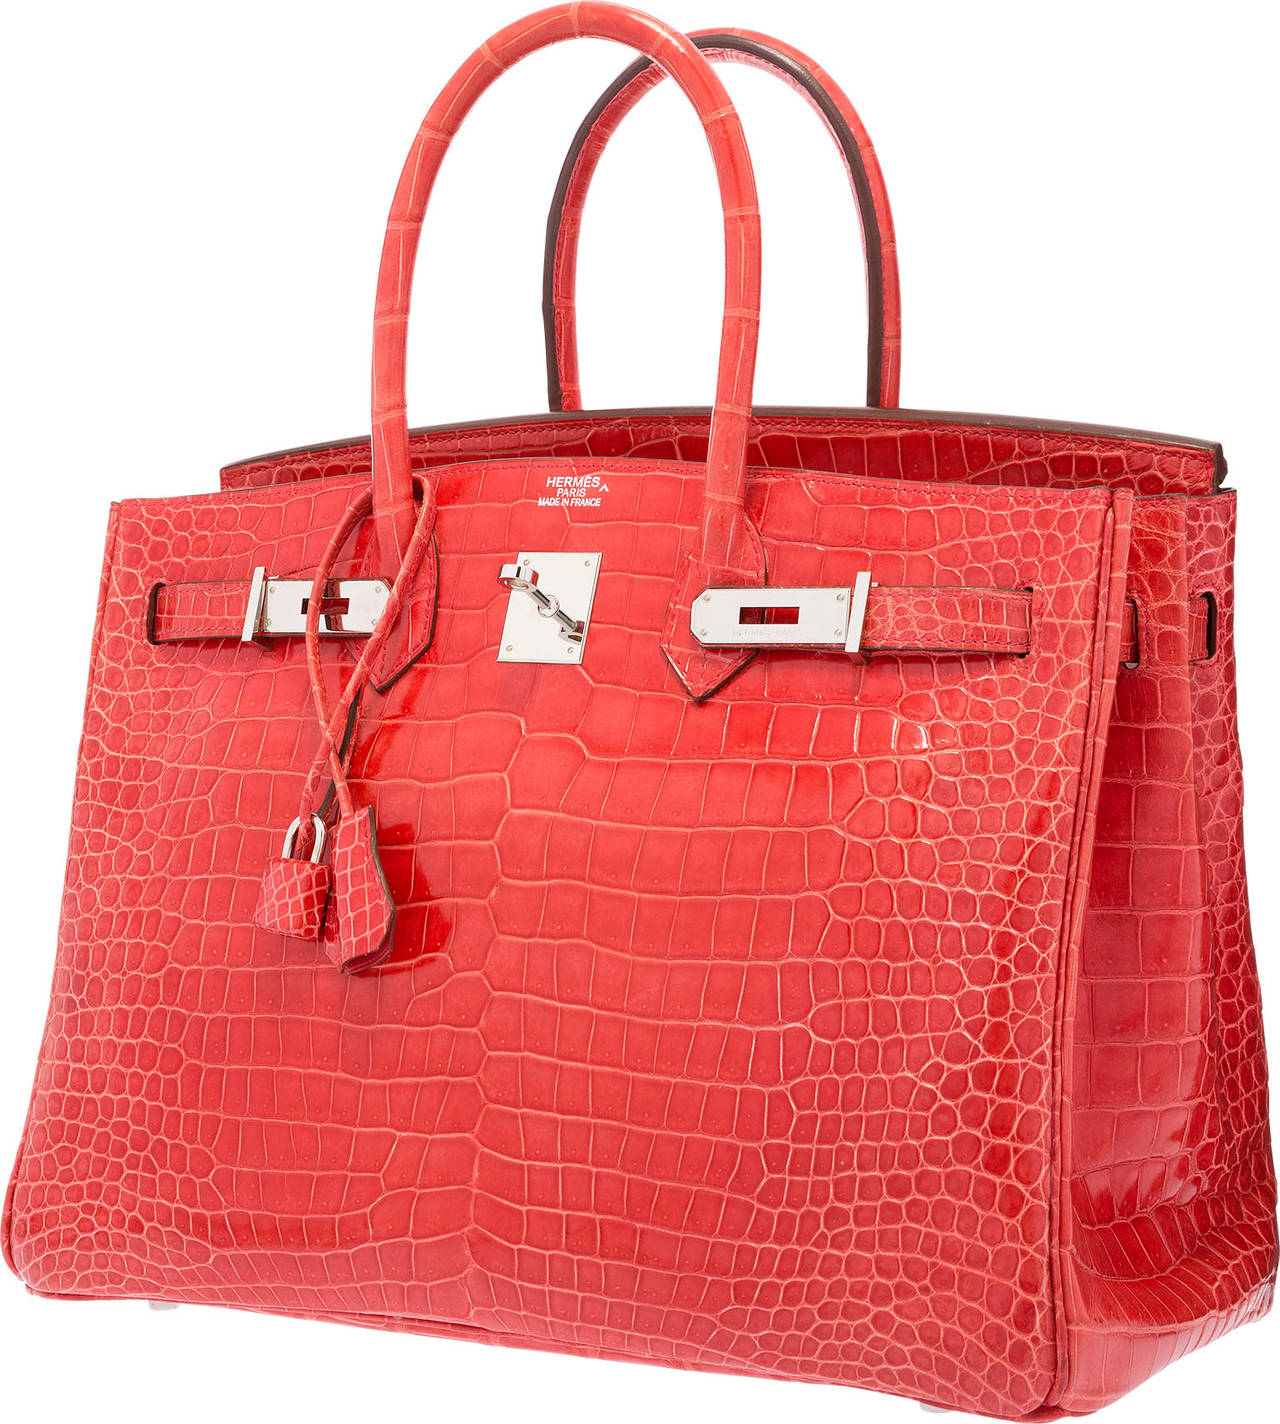 This Birkin makes the perfect bright accessory! This collectible, hard to find bag is done in a fun and vibrant color but manages to maintain an elegant allure. It is done in Shiny Bougainvillea Porosus Crocodile, an unbeatable combination.  This